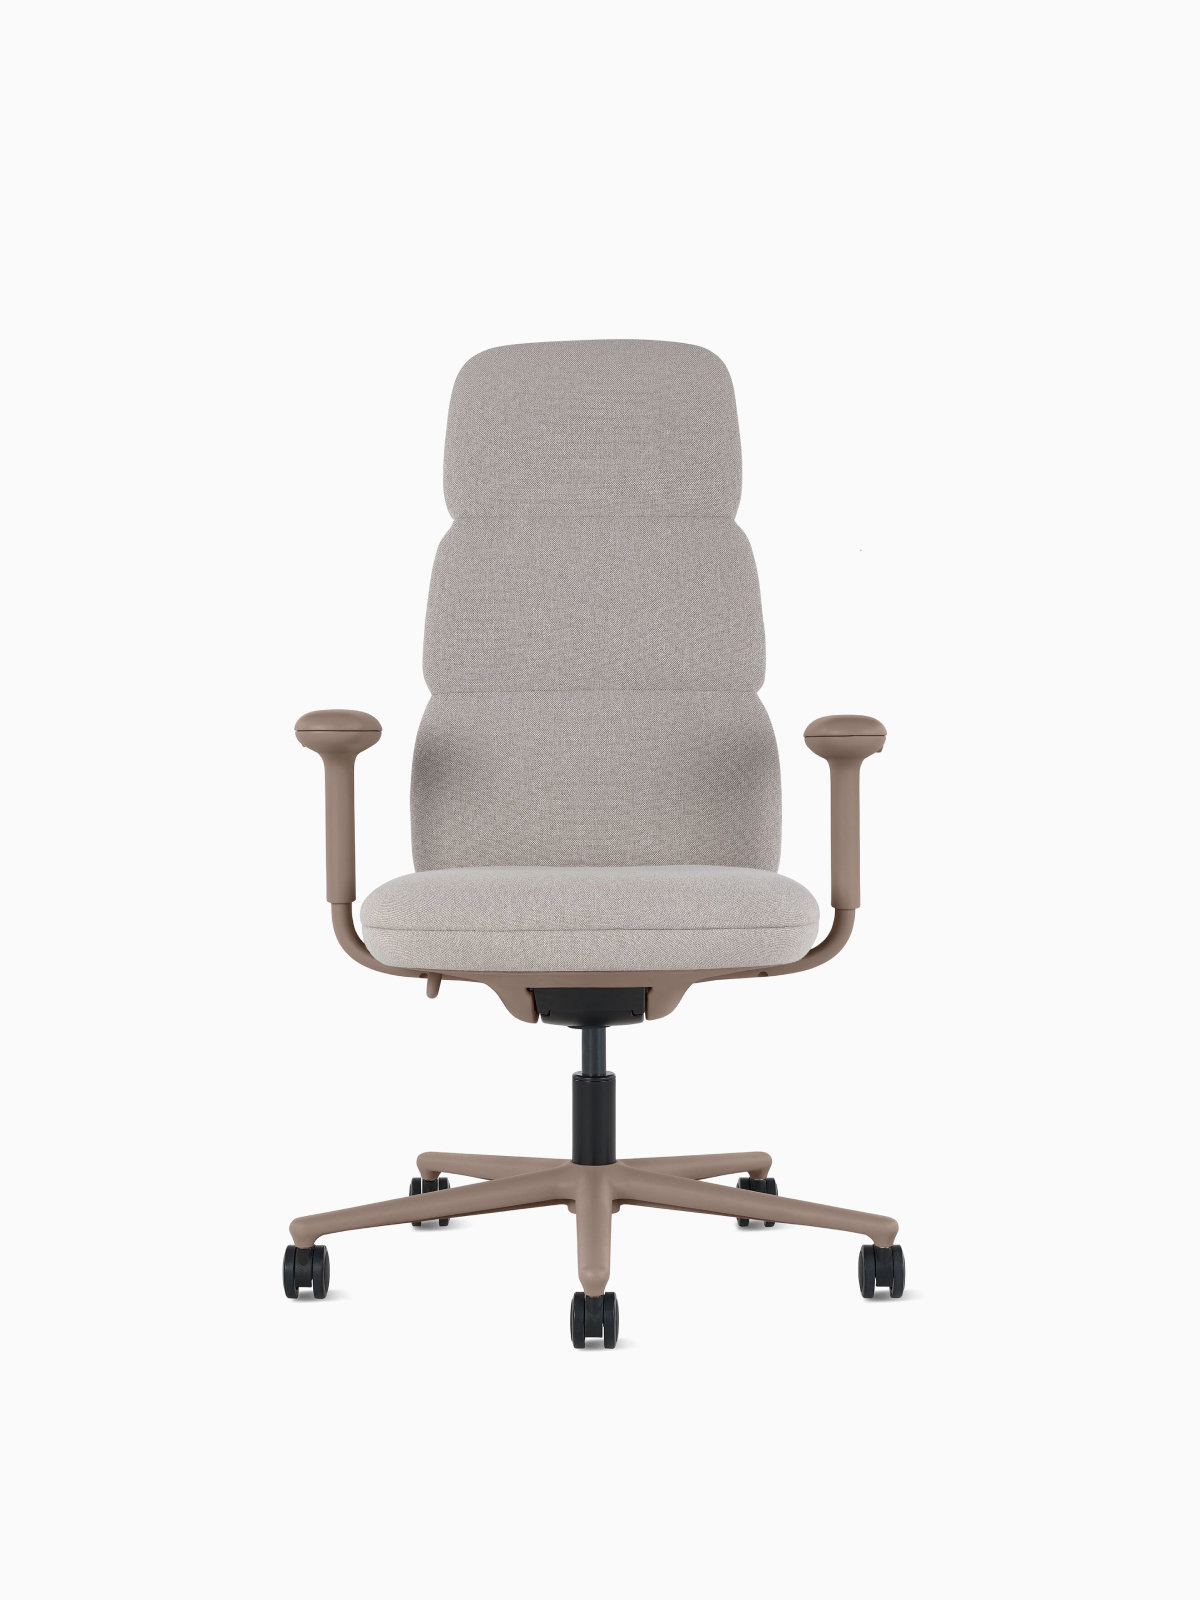 Front angle view of a high-back Asari chair by Herman Miller in light brown with height adjustable arms.